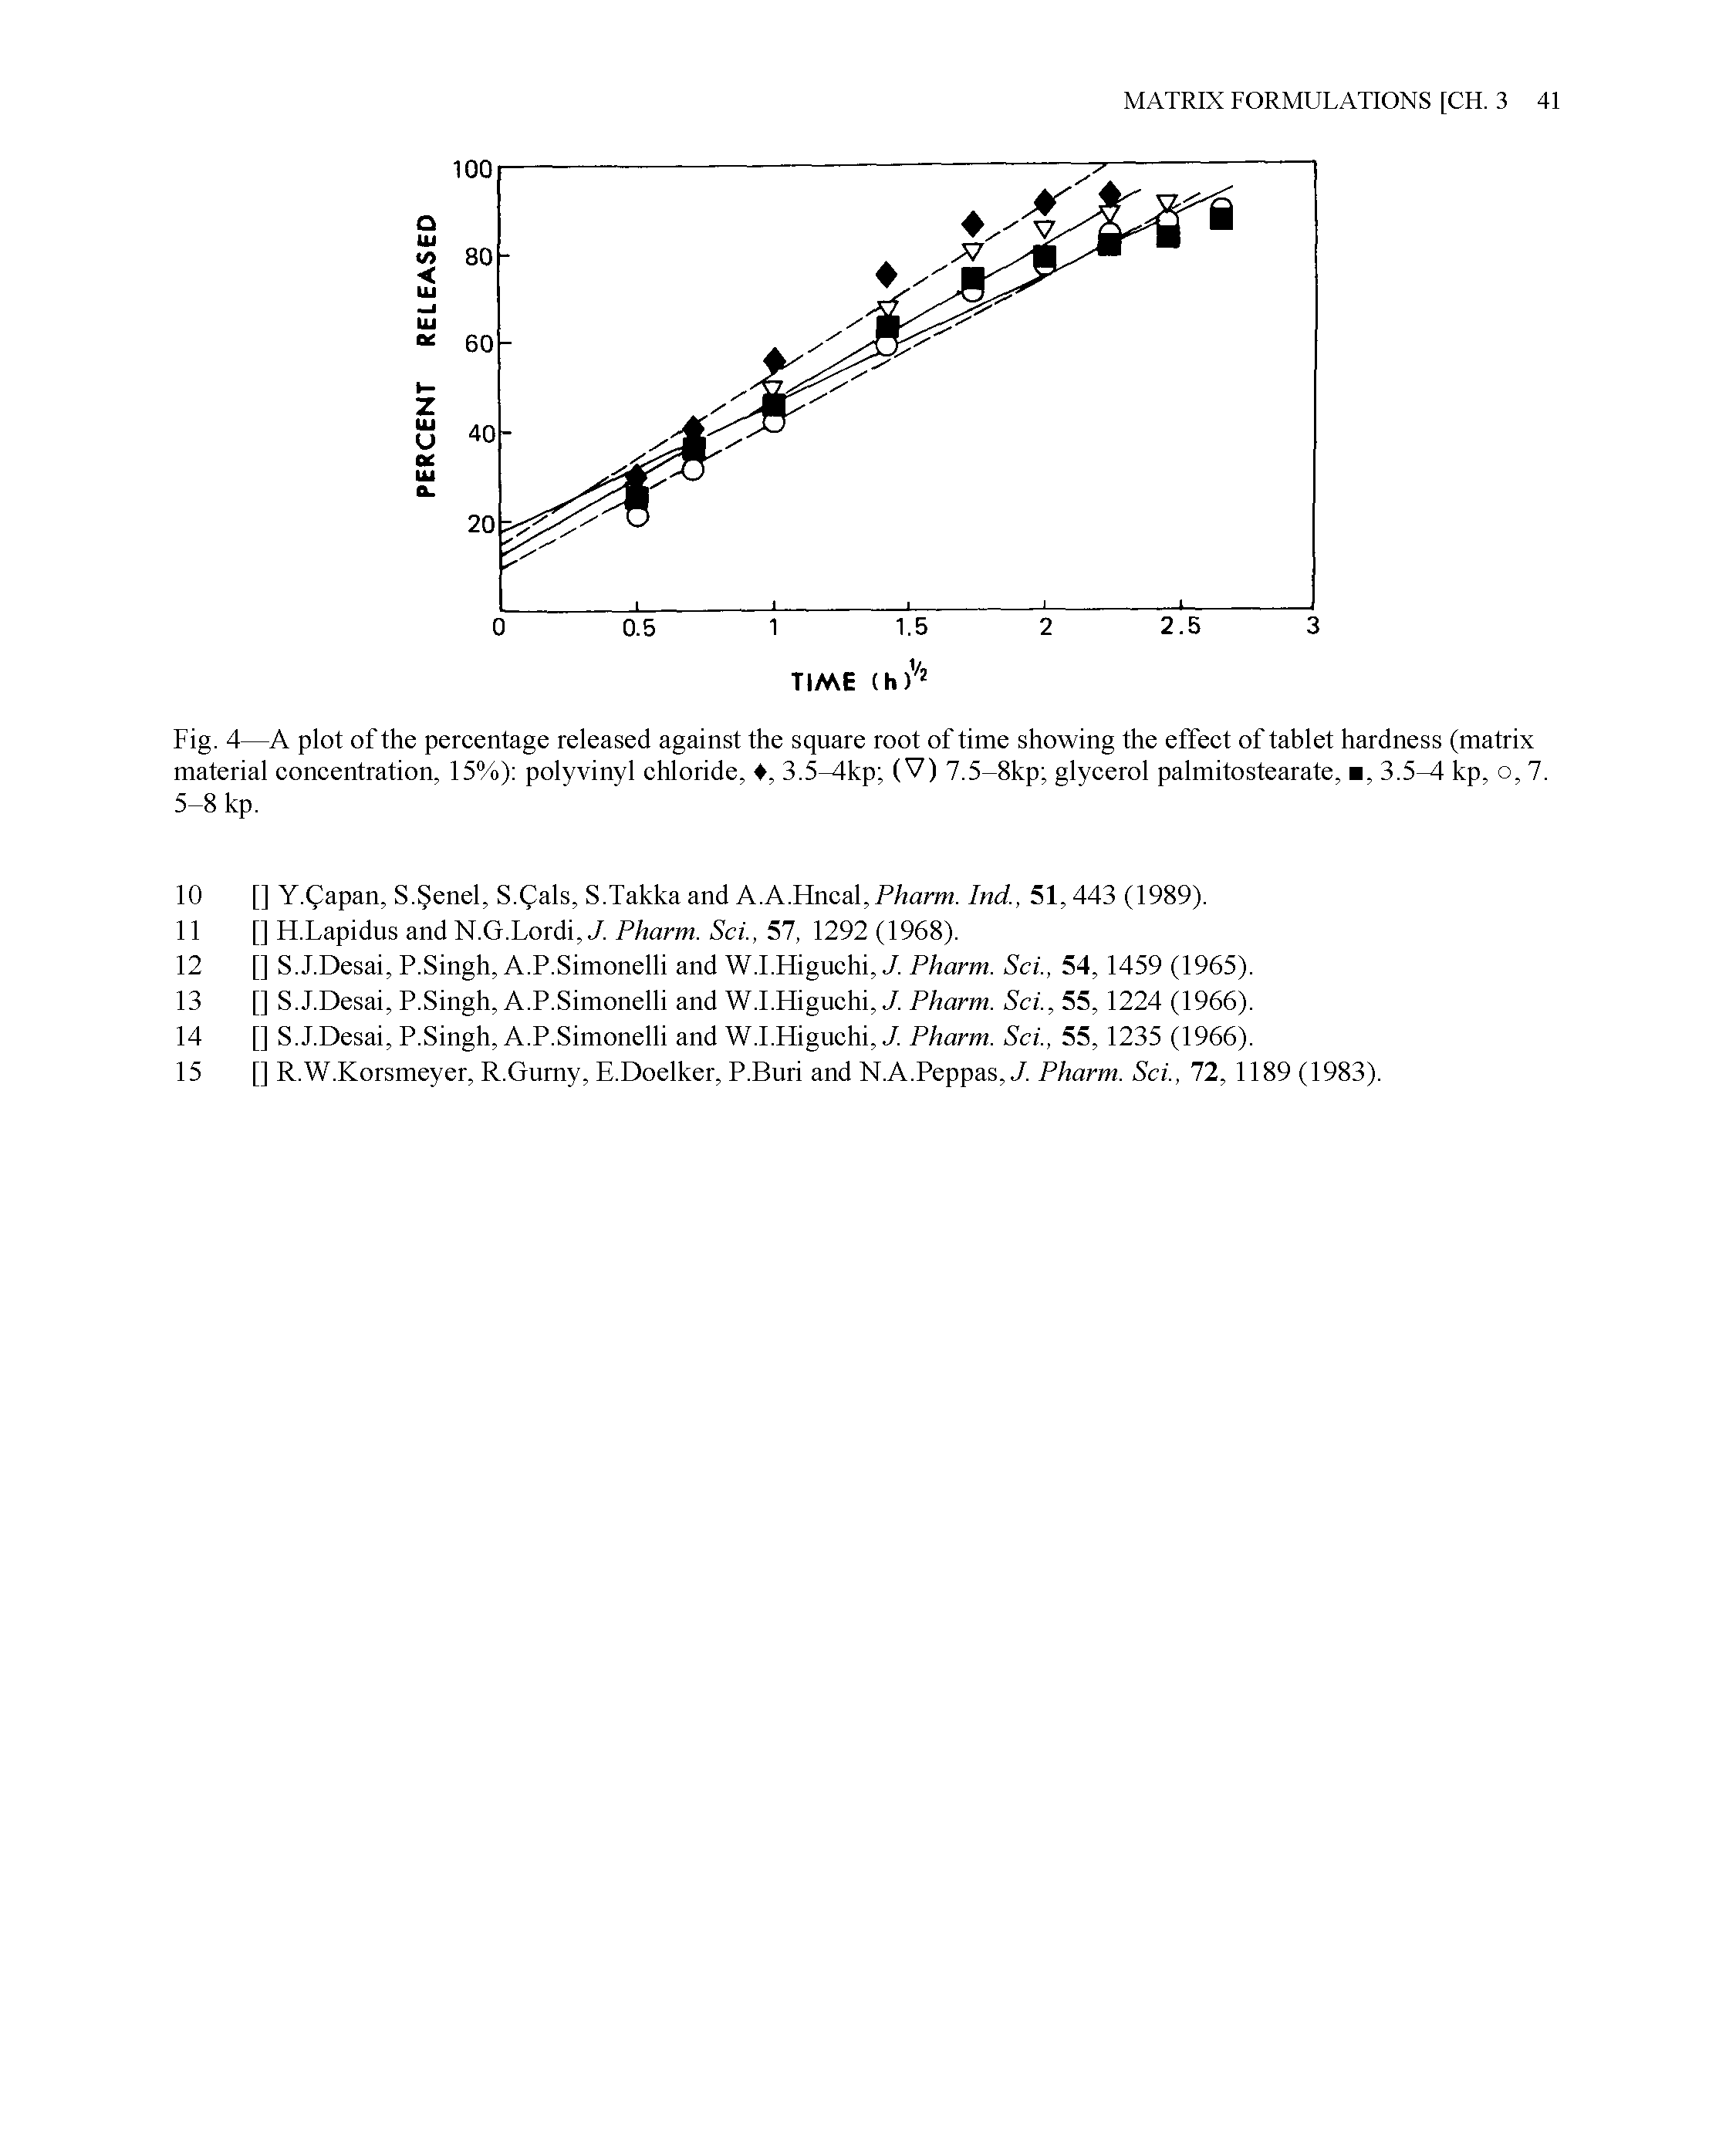 Fig. 4—A plot of the percentage released against the square root of time showing the effect of tablet hardness (matrix material concentration, 15%) polyvinyl chloride, , 3.5 1kp (V) 7.5-8kp glycerol palmitostearate, , 3.5—4 kp, o, 7. 5-8 kp.